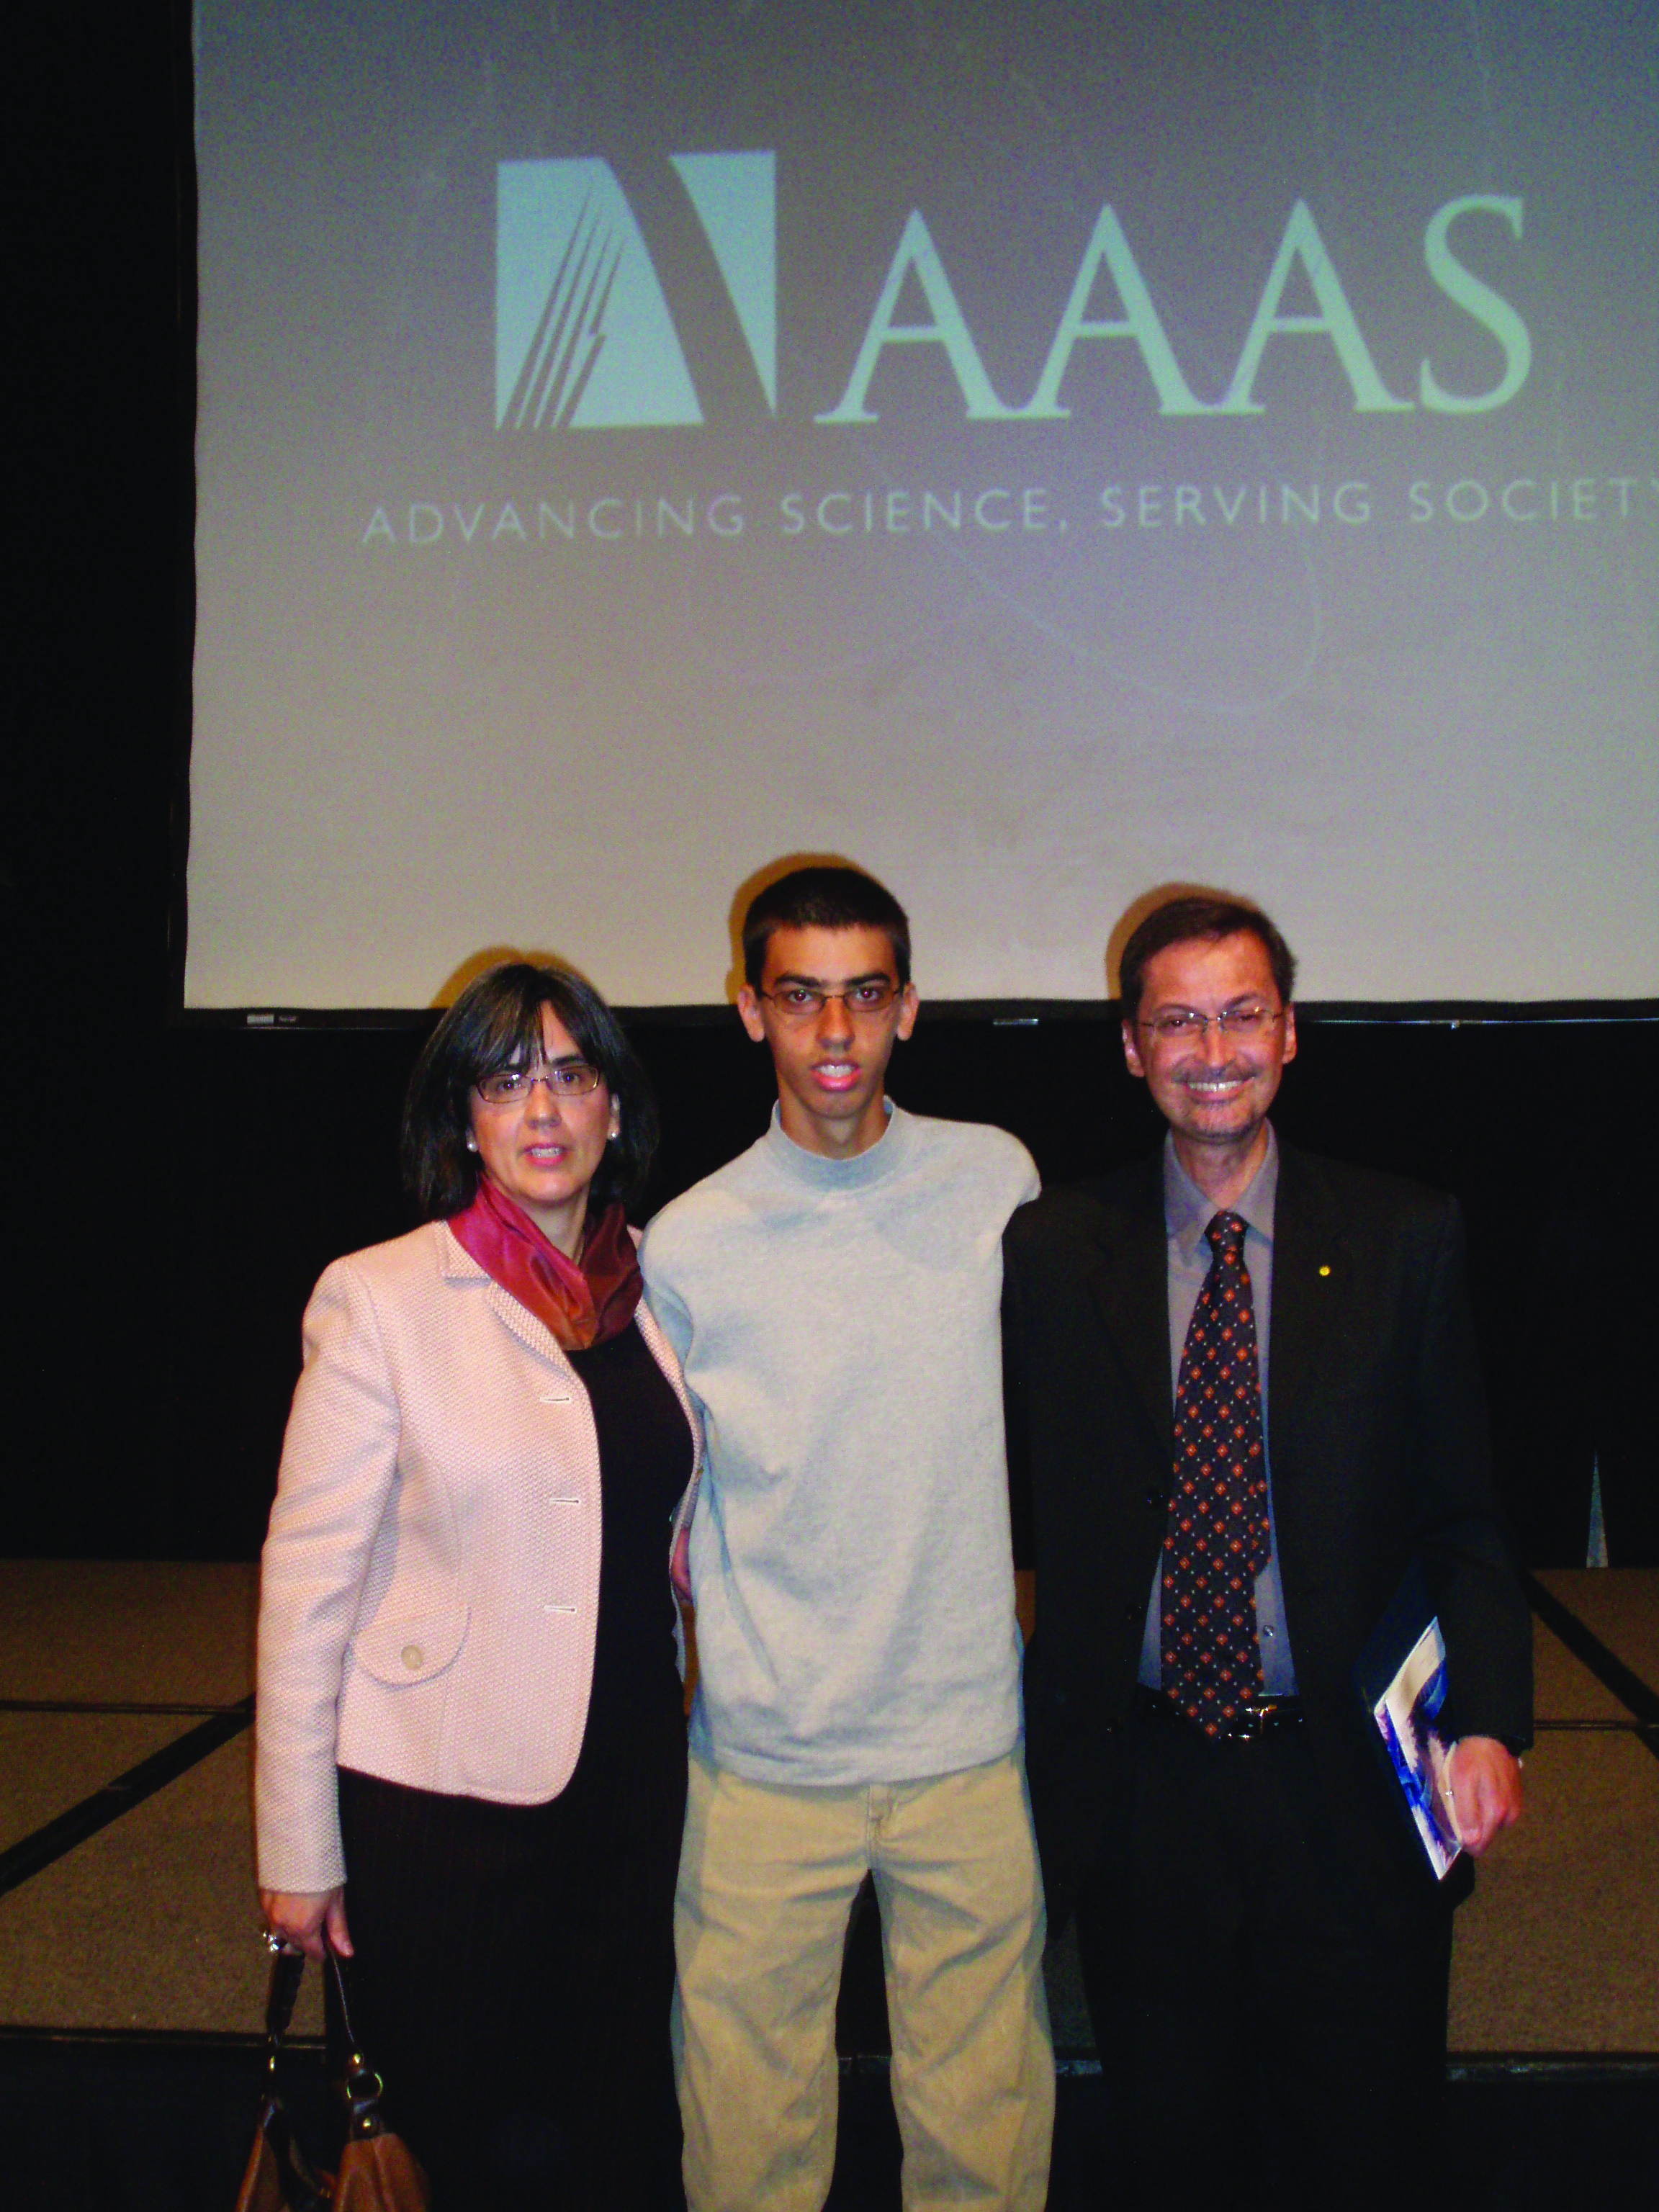 Morikis with his family when he was named an AAAS Fellow in 2007.